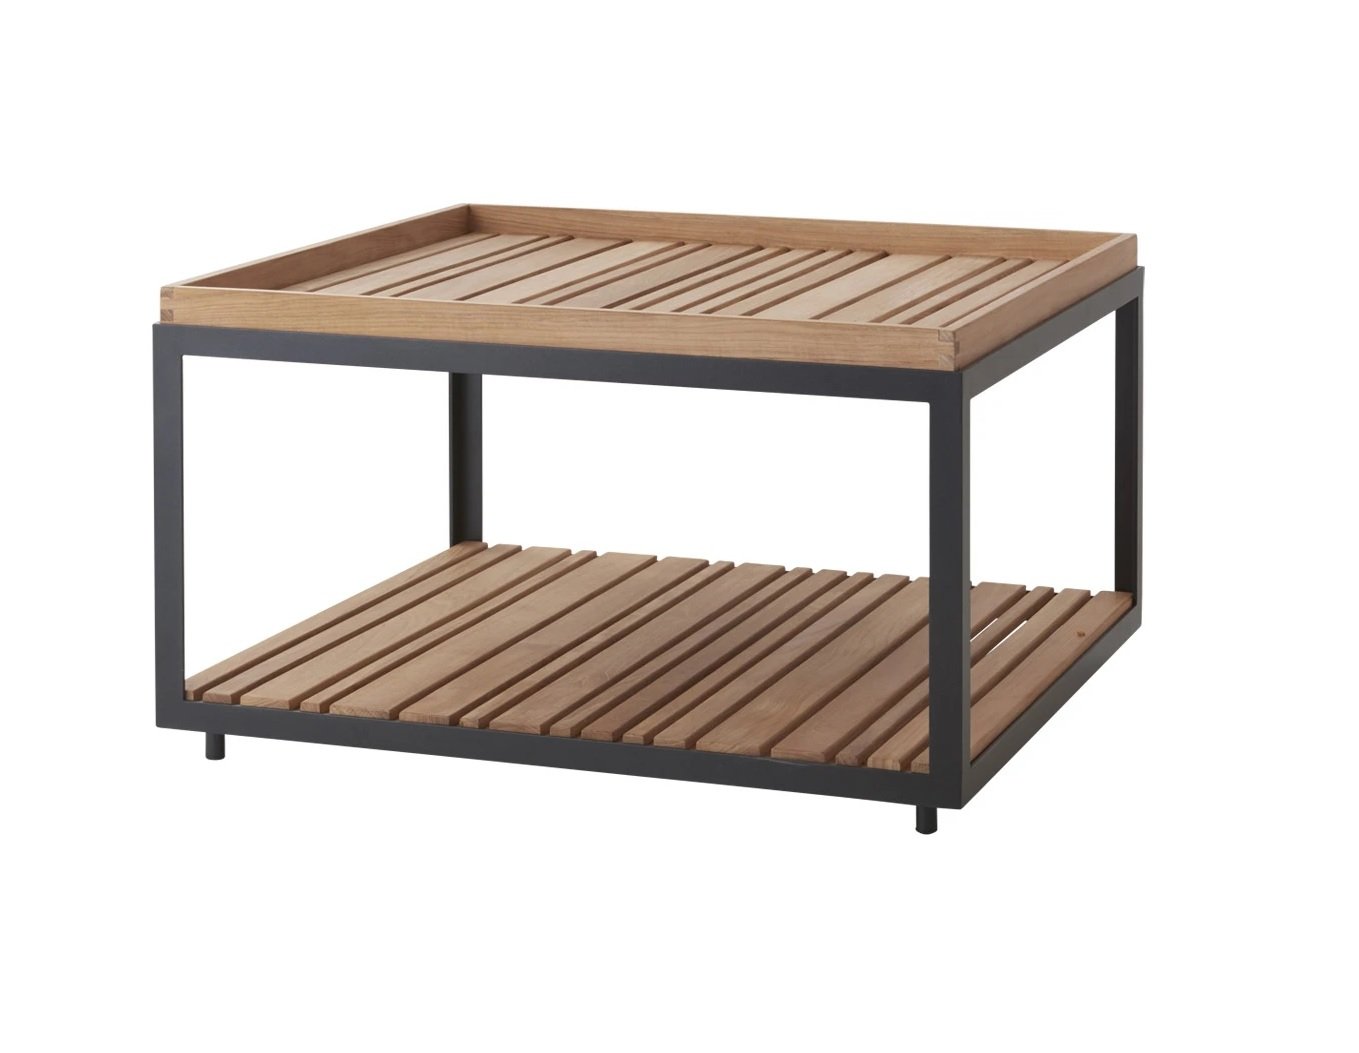 Level Coffee Table from Cane-line, designed by byKATO